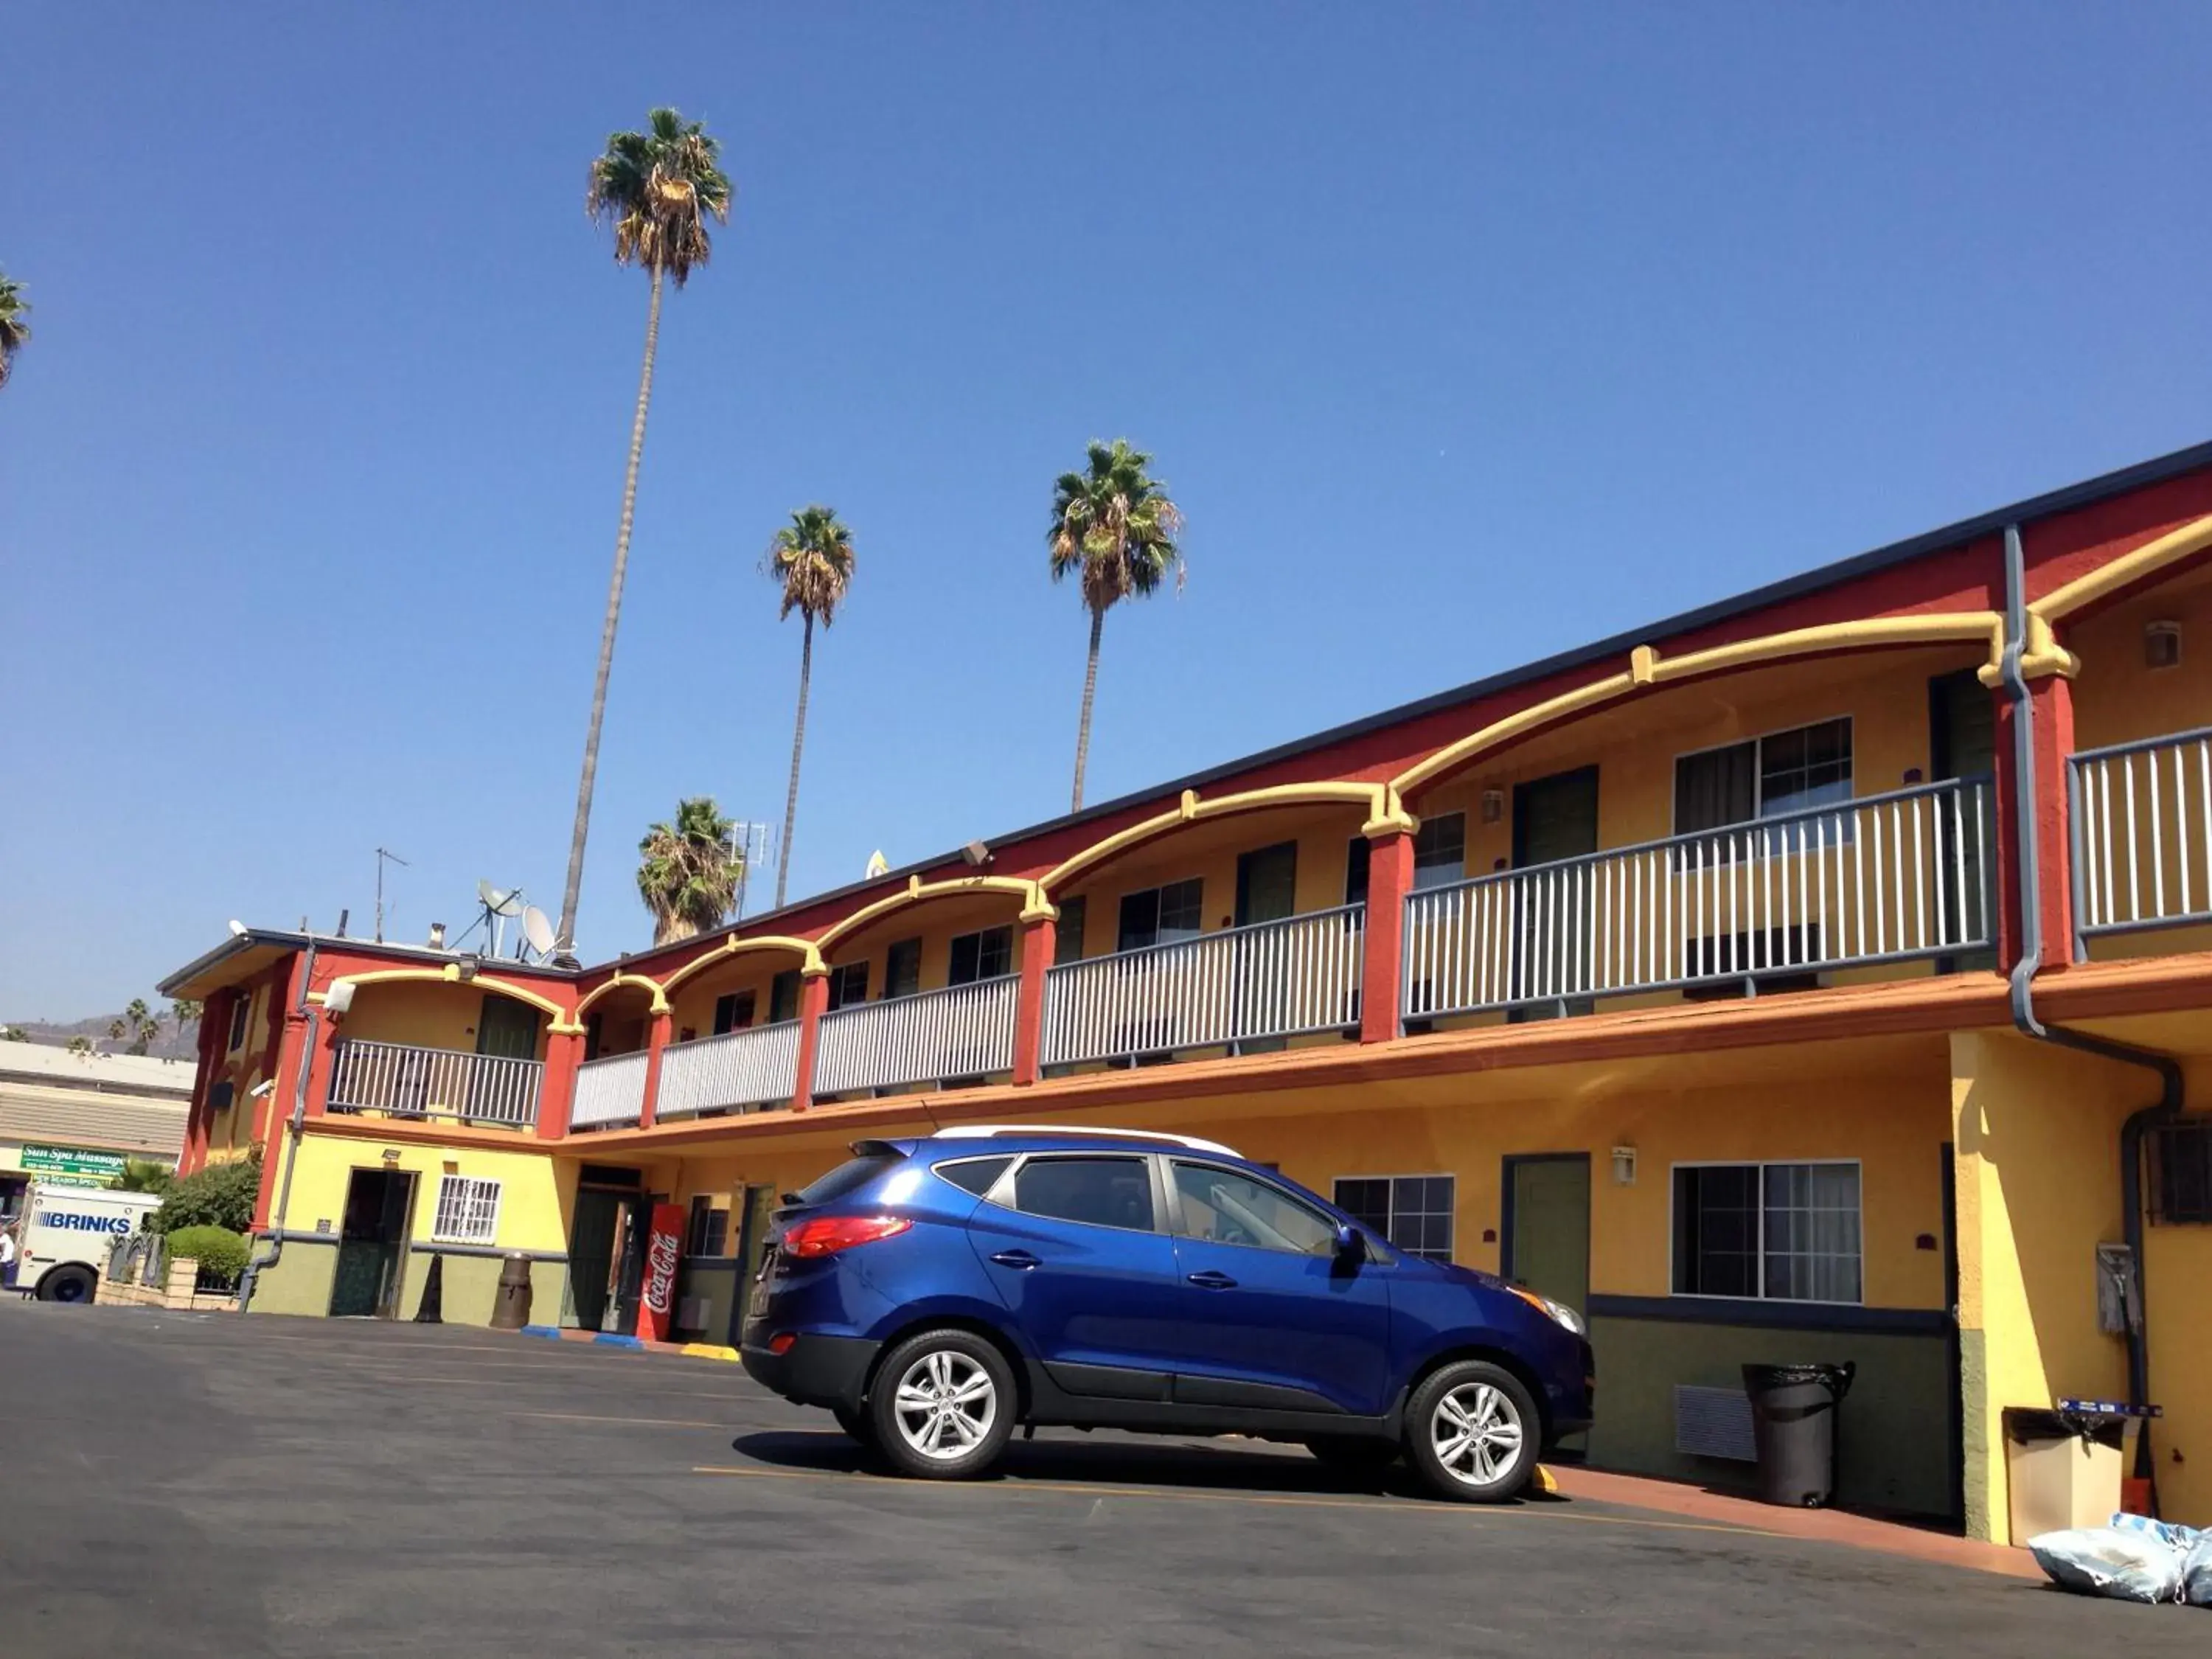 Property Building in Economy Inn Hollywood